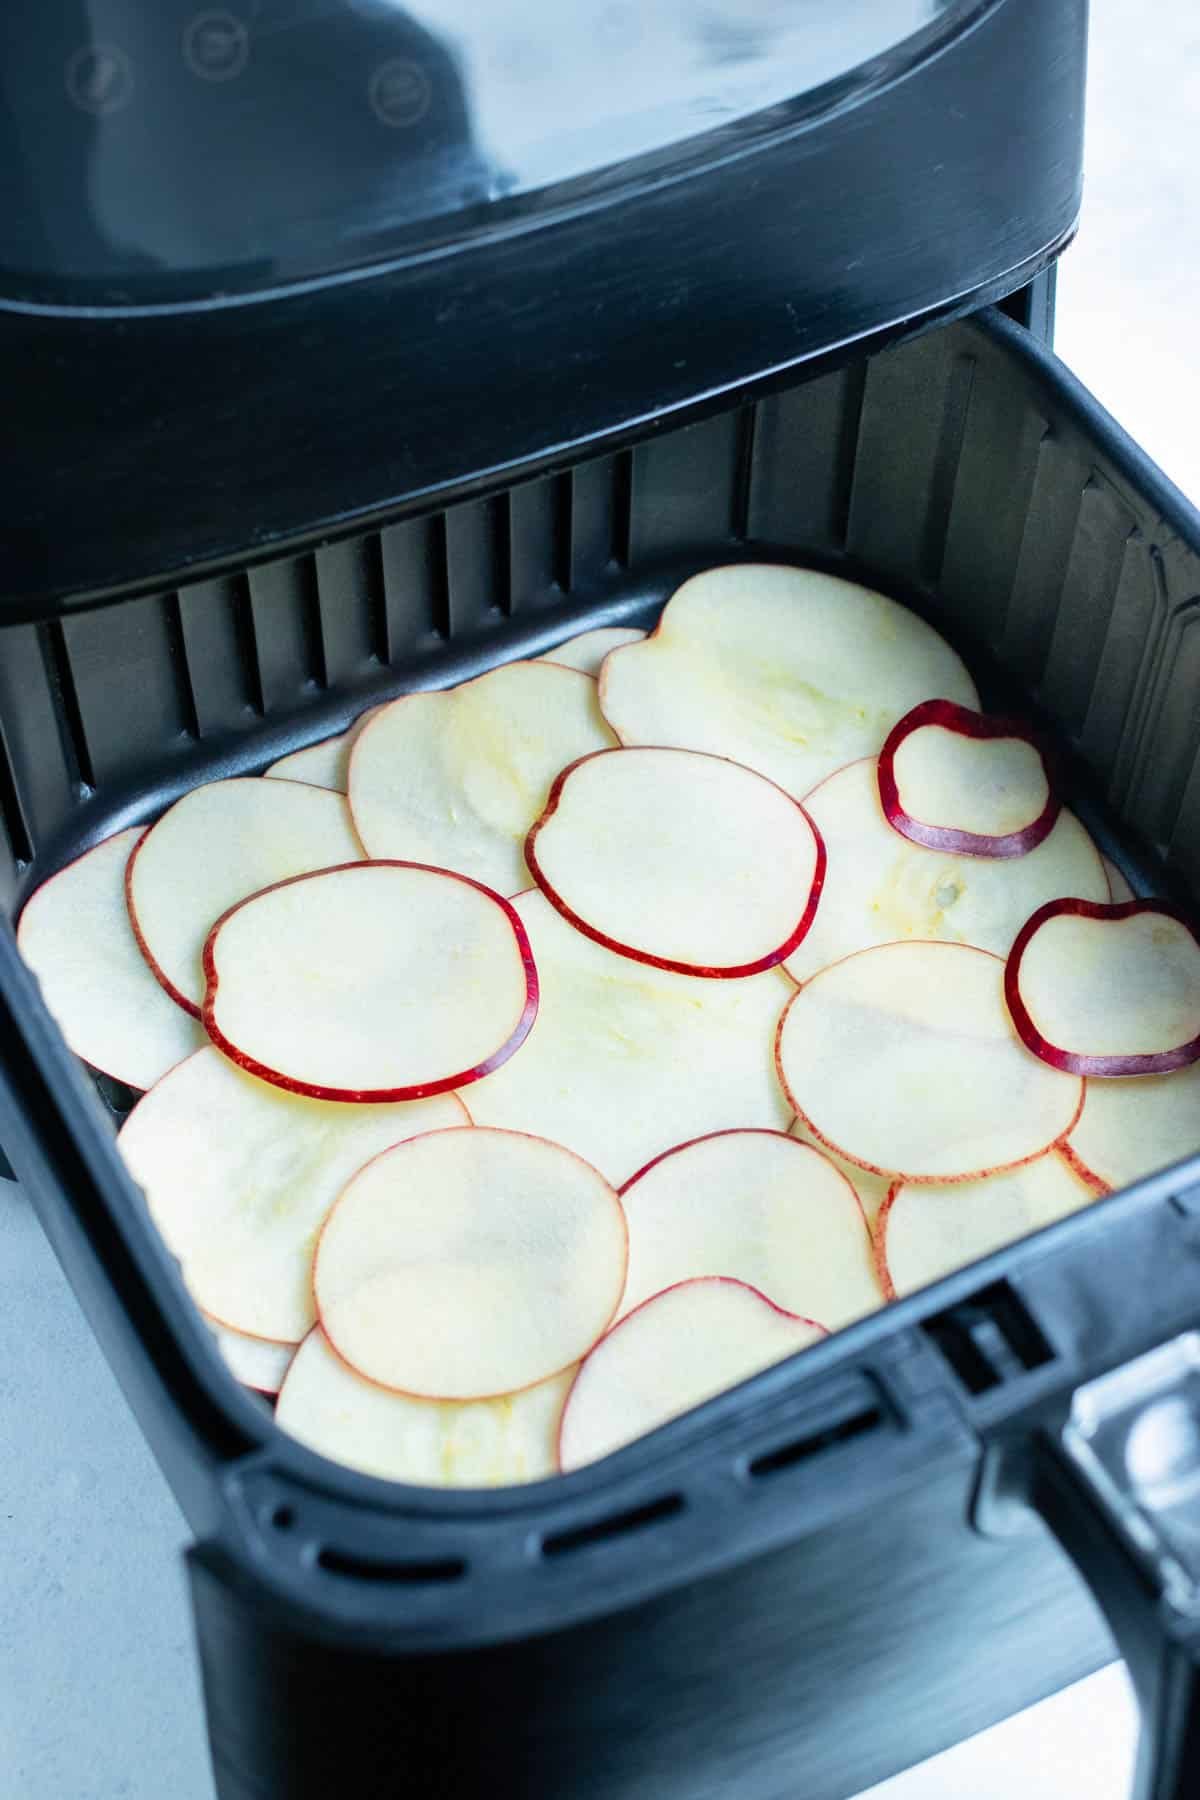 All the apple slices are laid in one layer in the air fryer.